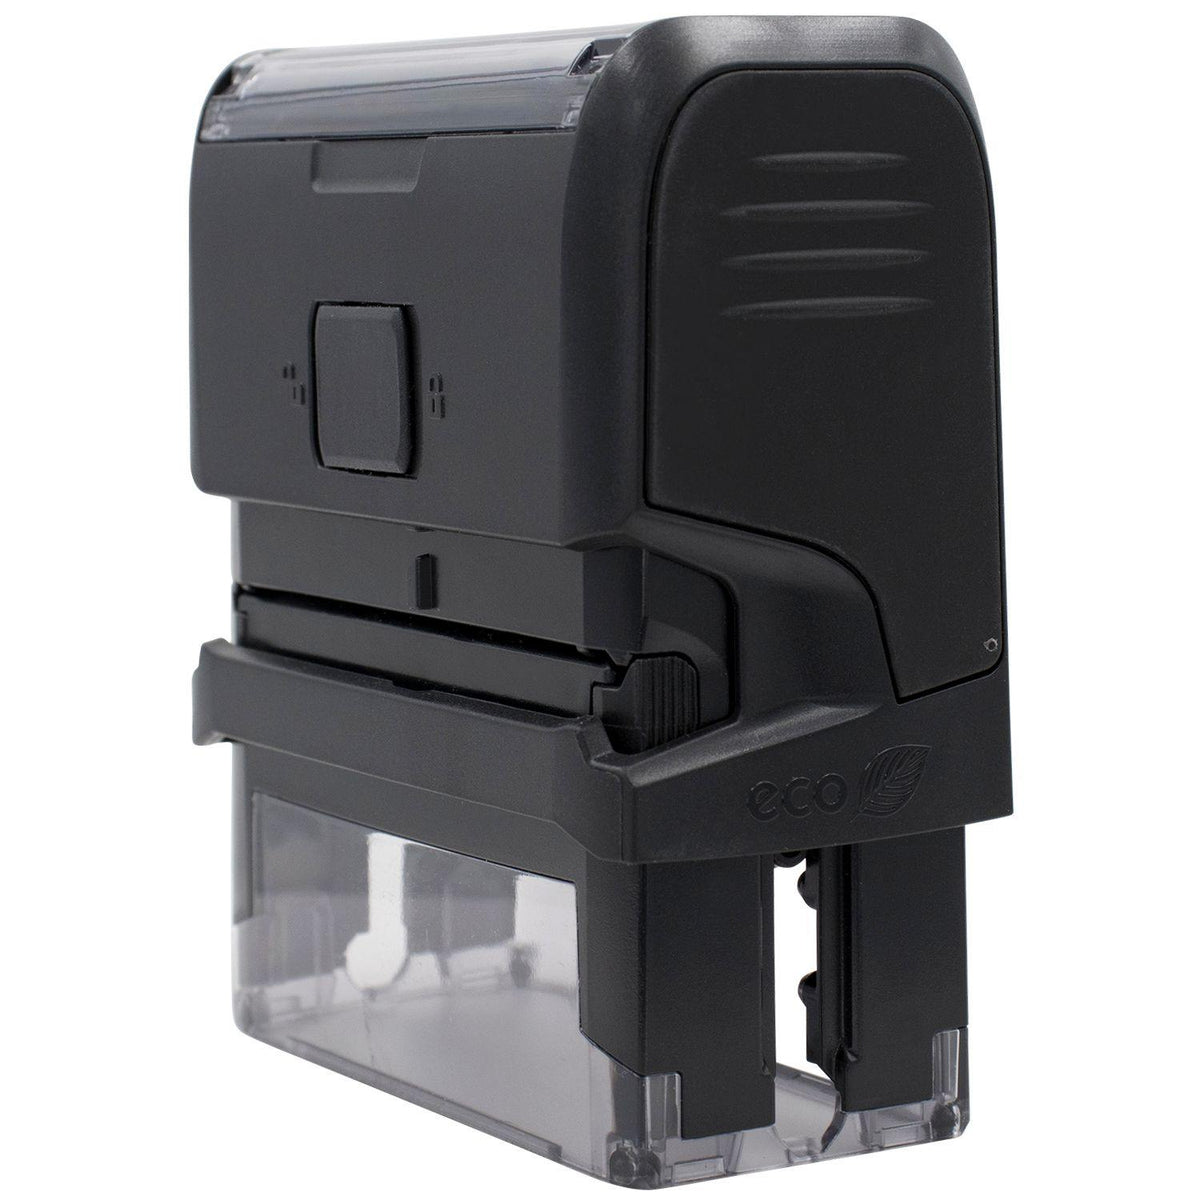 Side View of Large Self-Inking Cancelado Stamp at an Angle